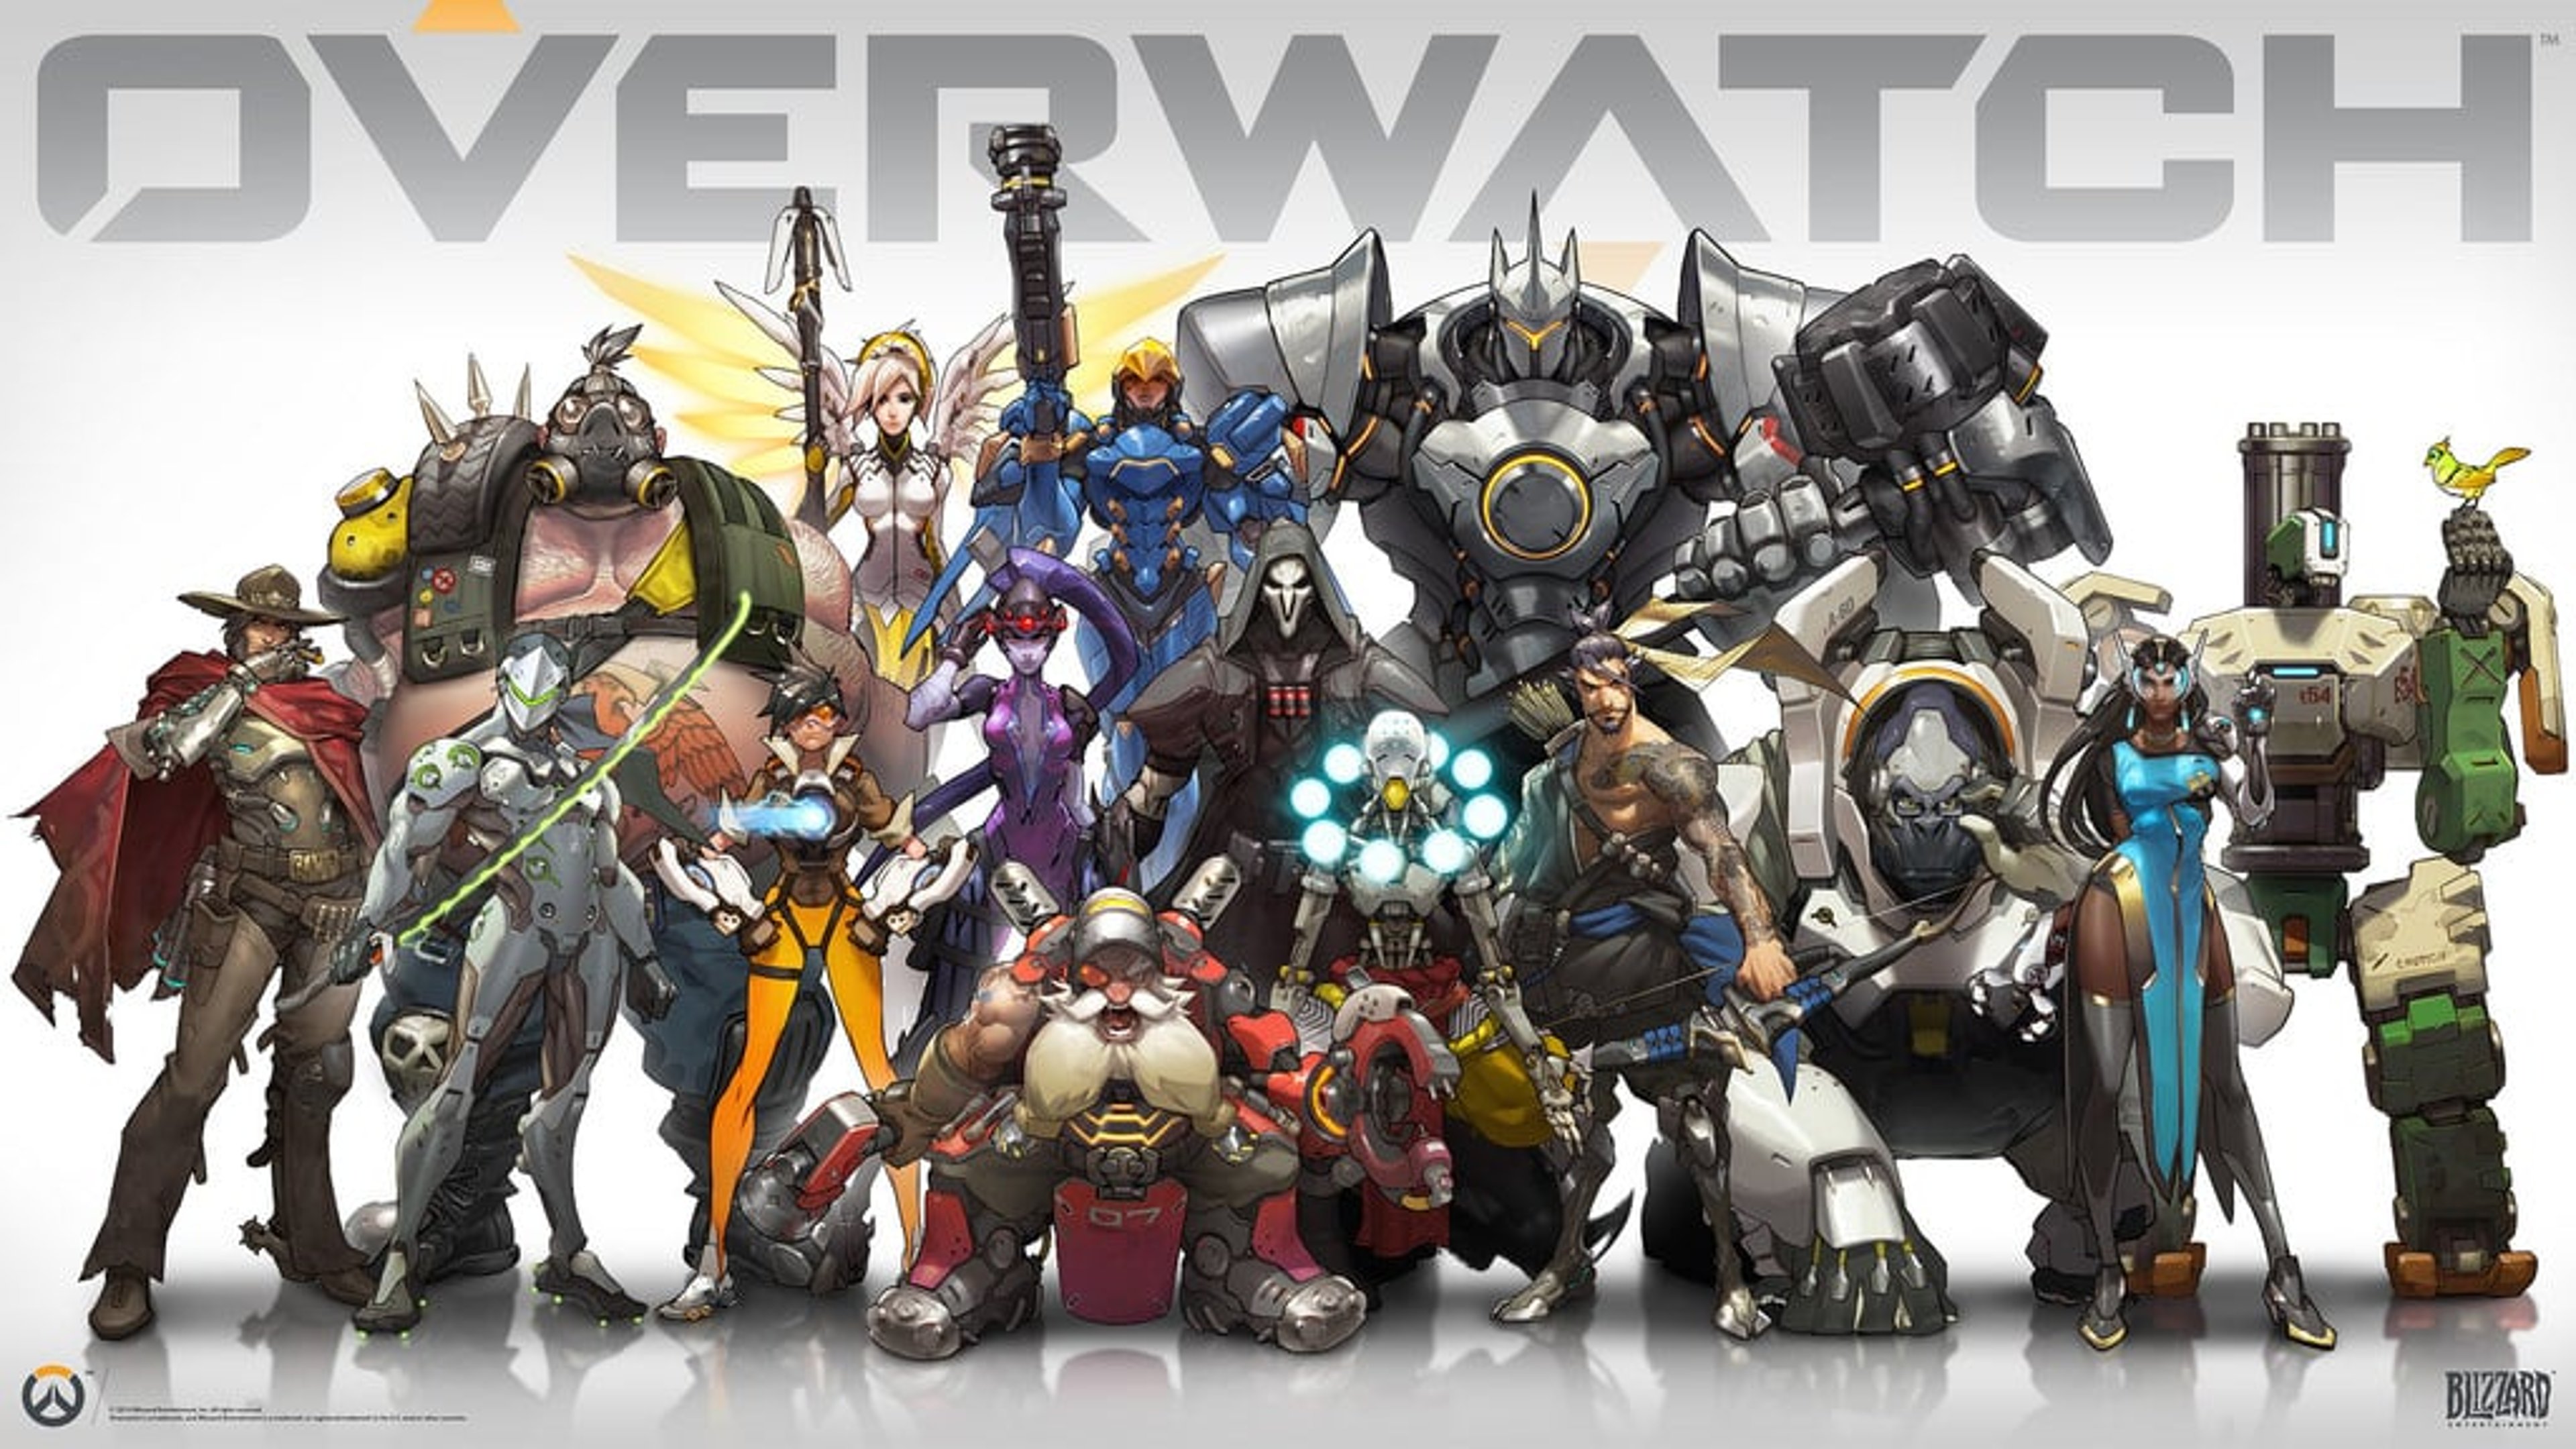 IN ARRIVO LA GAME OF THE YEAR EDITION DI OVERWATCH